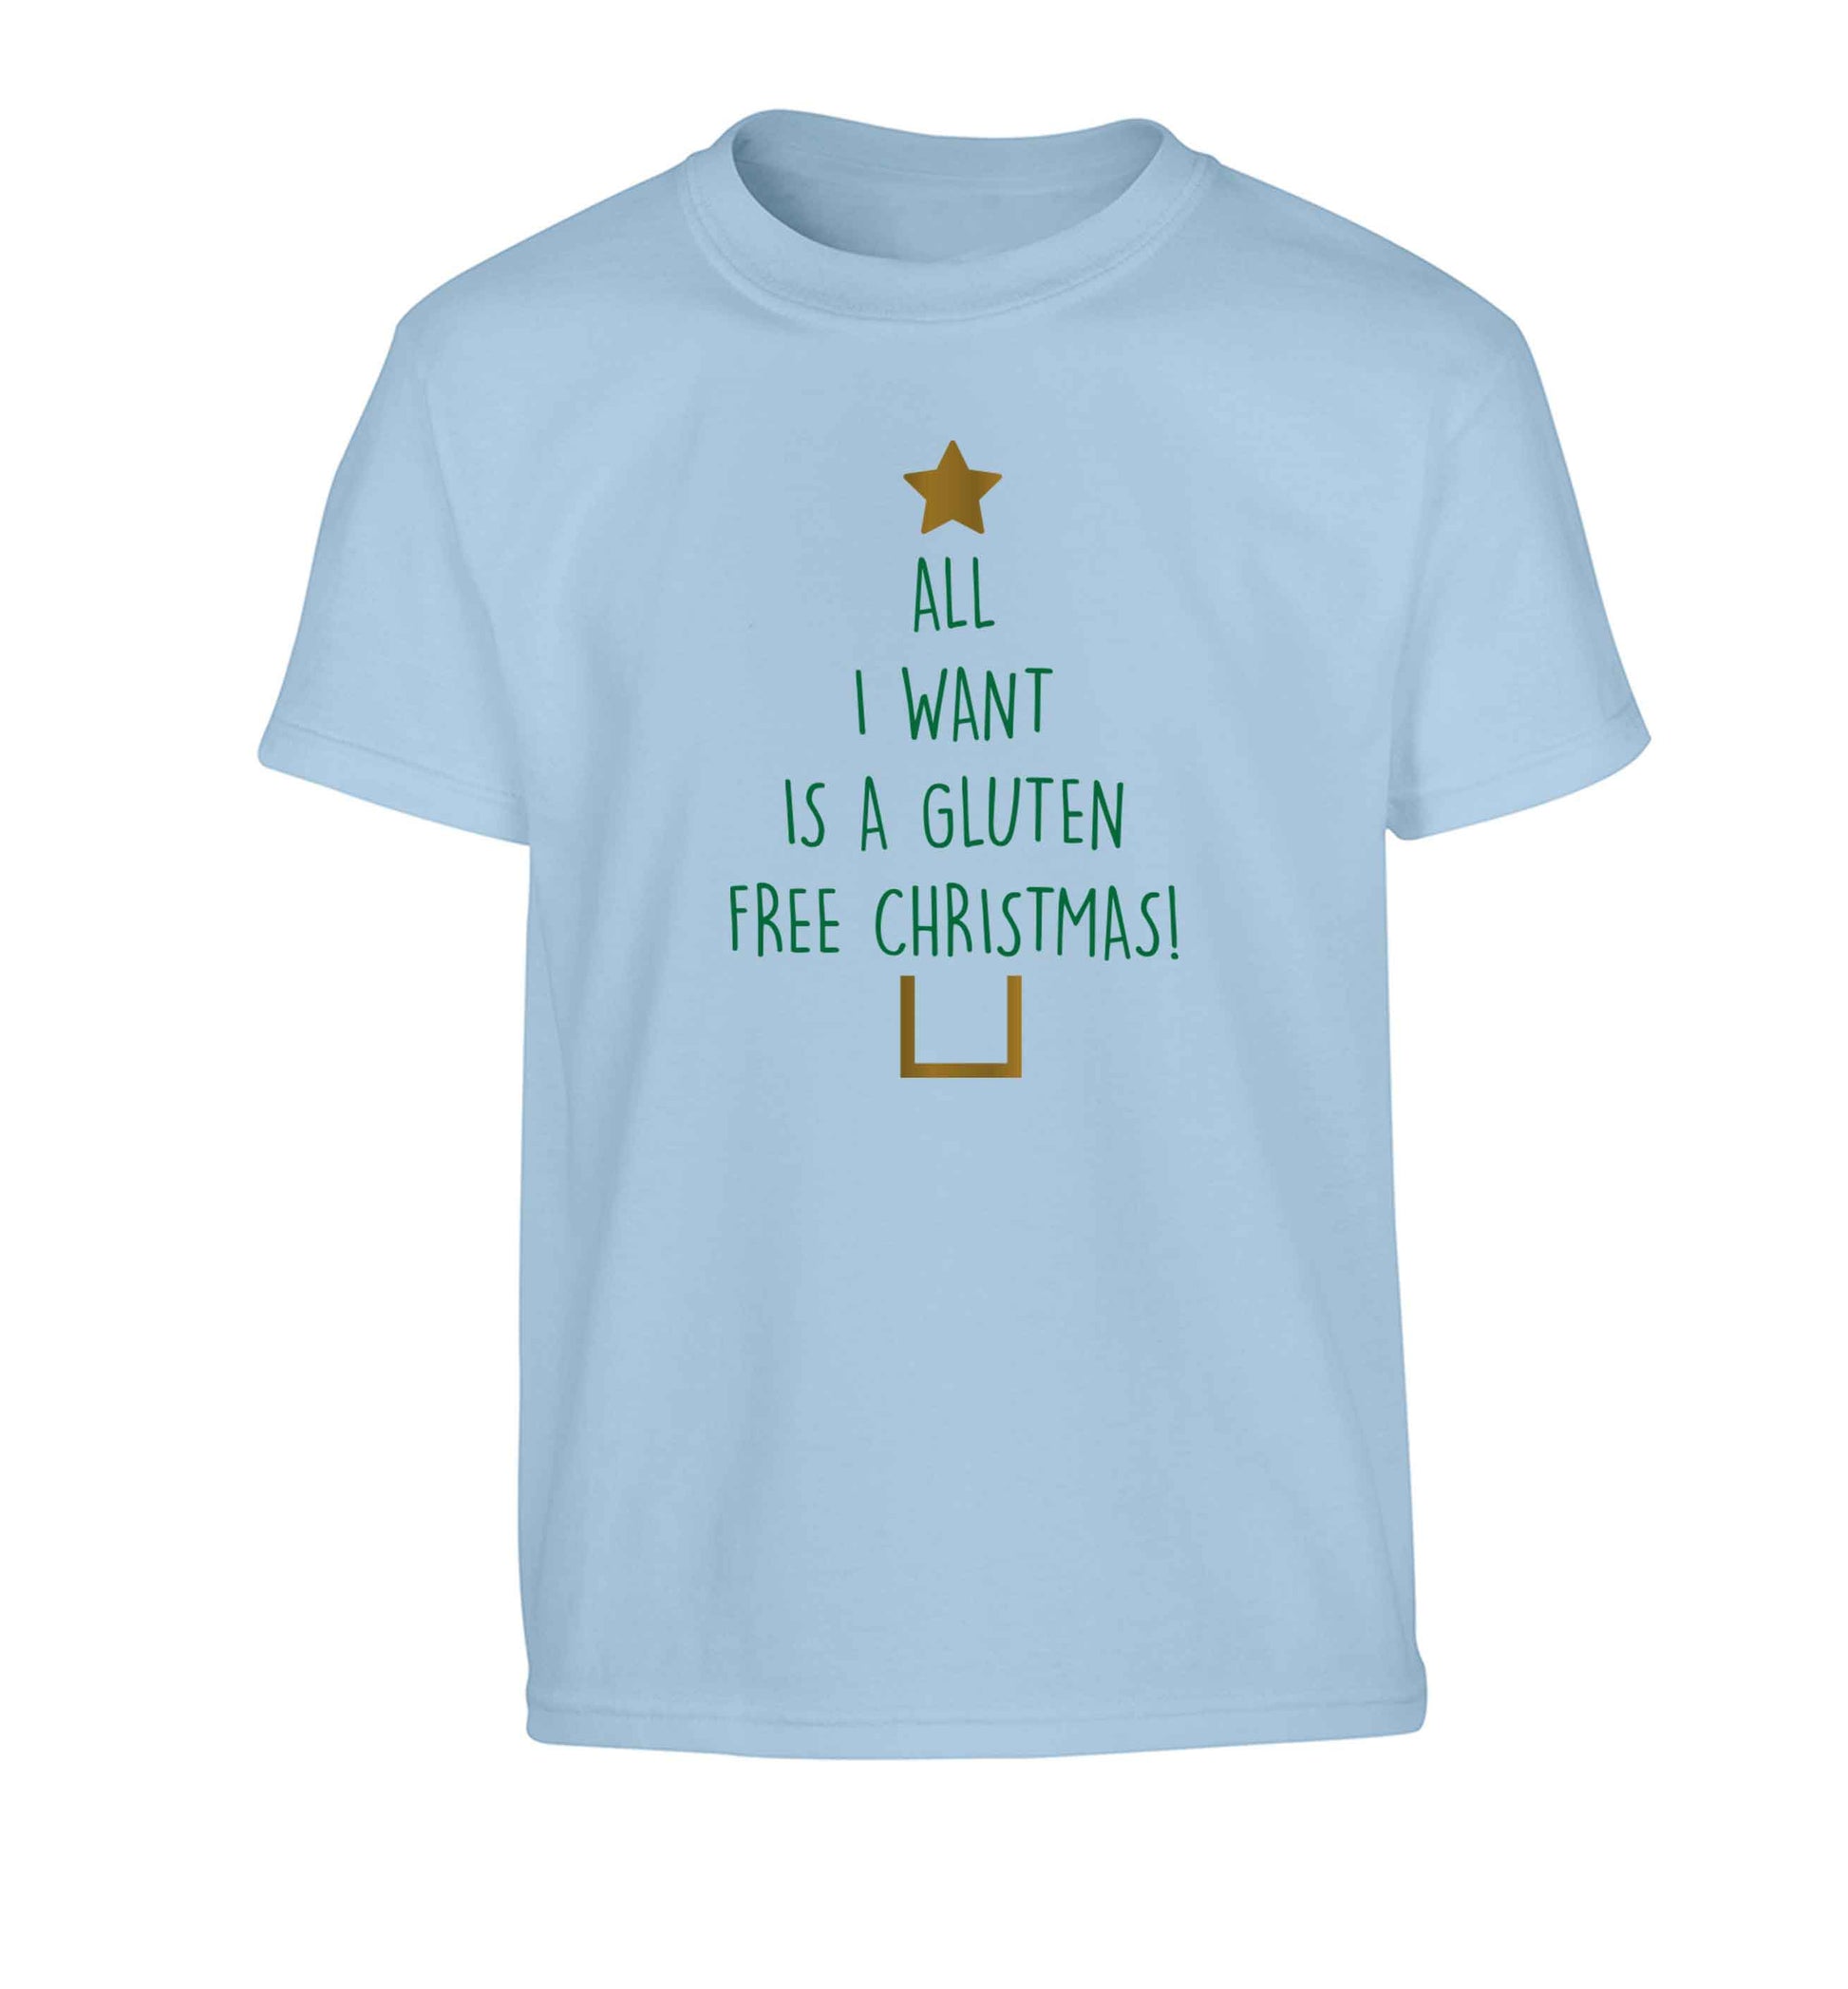 All I want is a gluten free Christmas Children's light blue Tshirt 12-13 Years